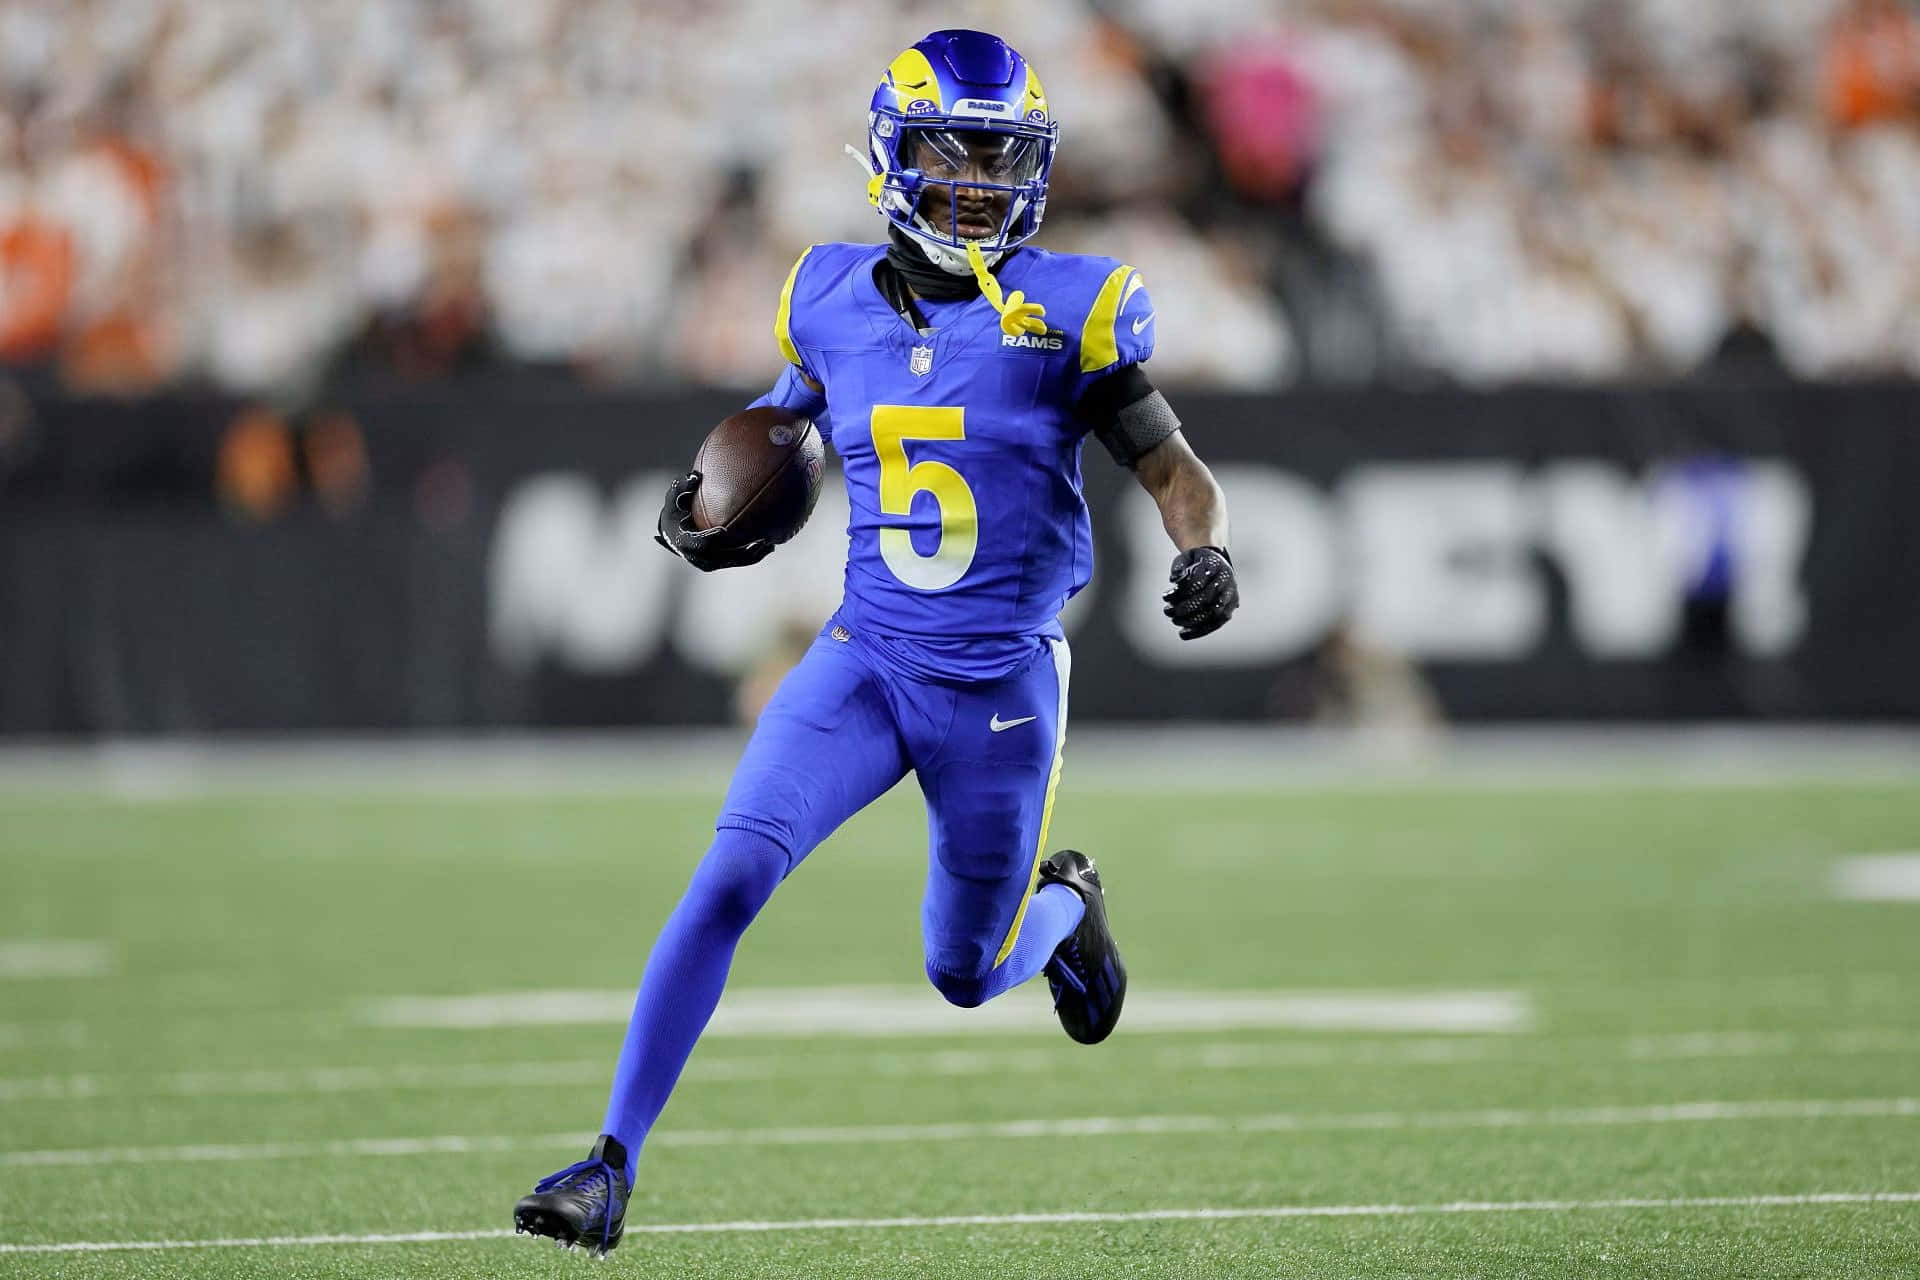 Rams Player Number5 In Action.jpg Wallpaper